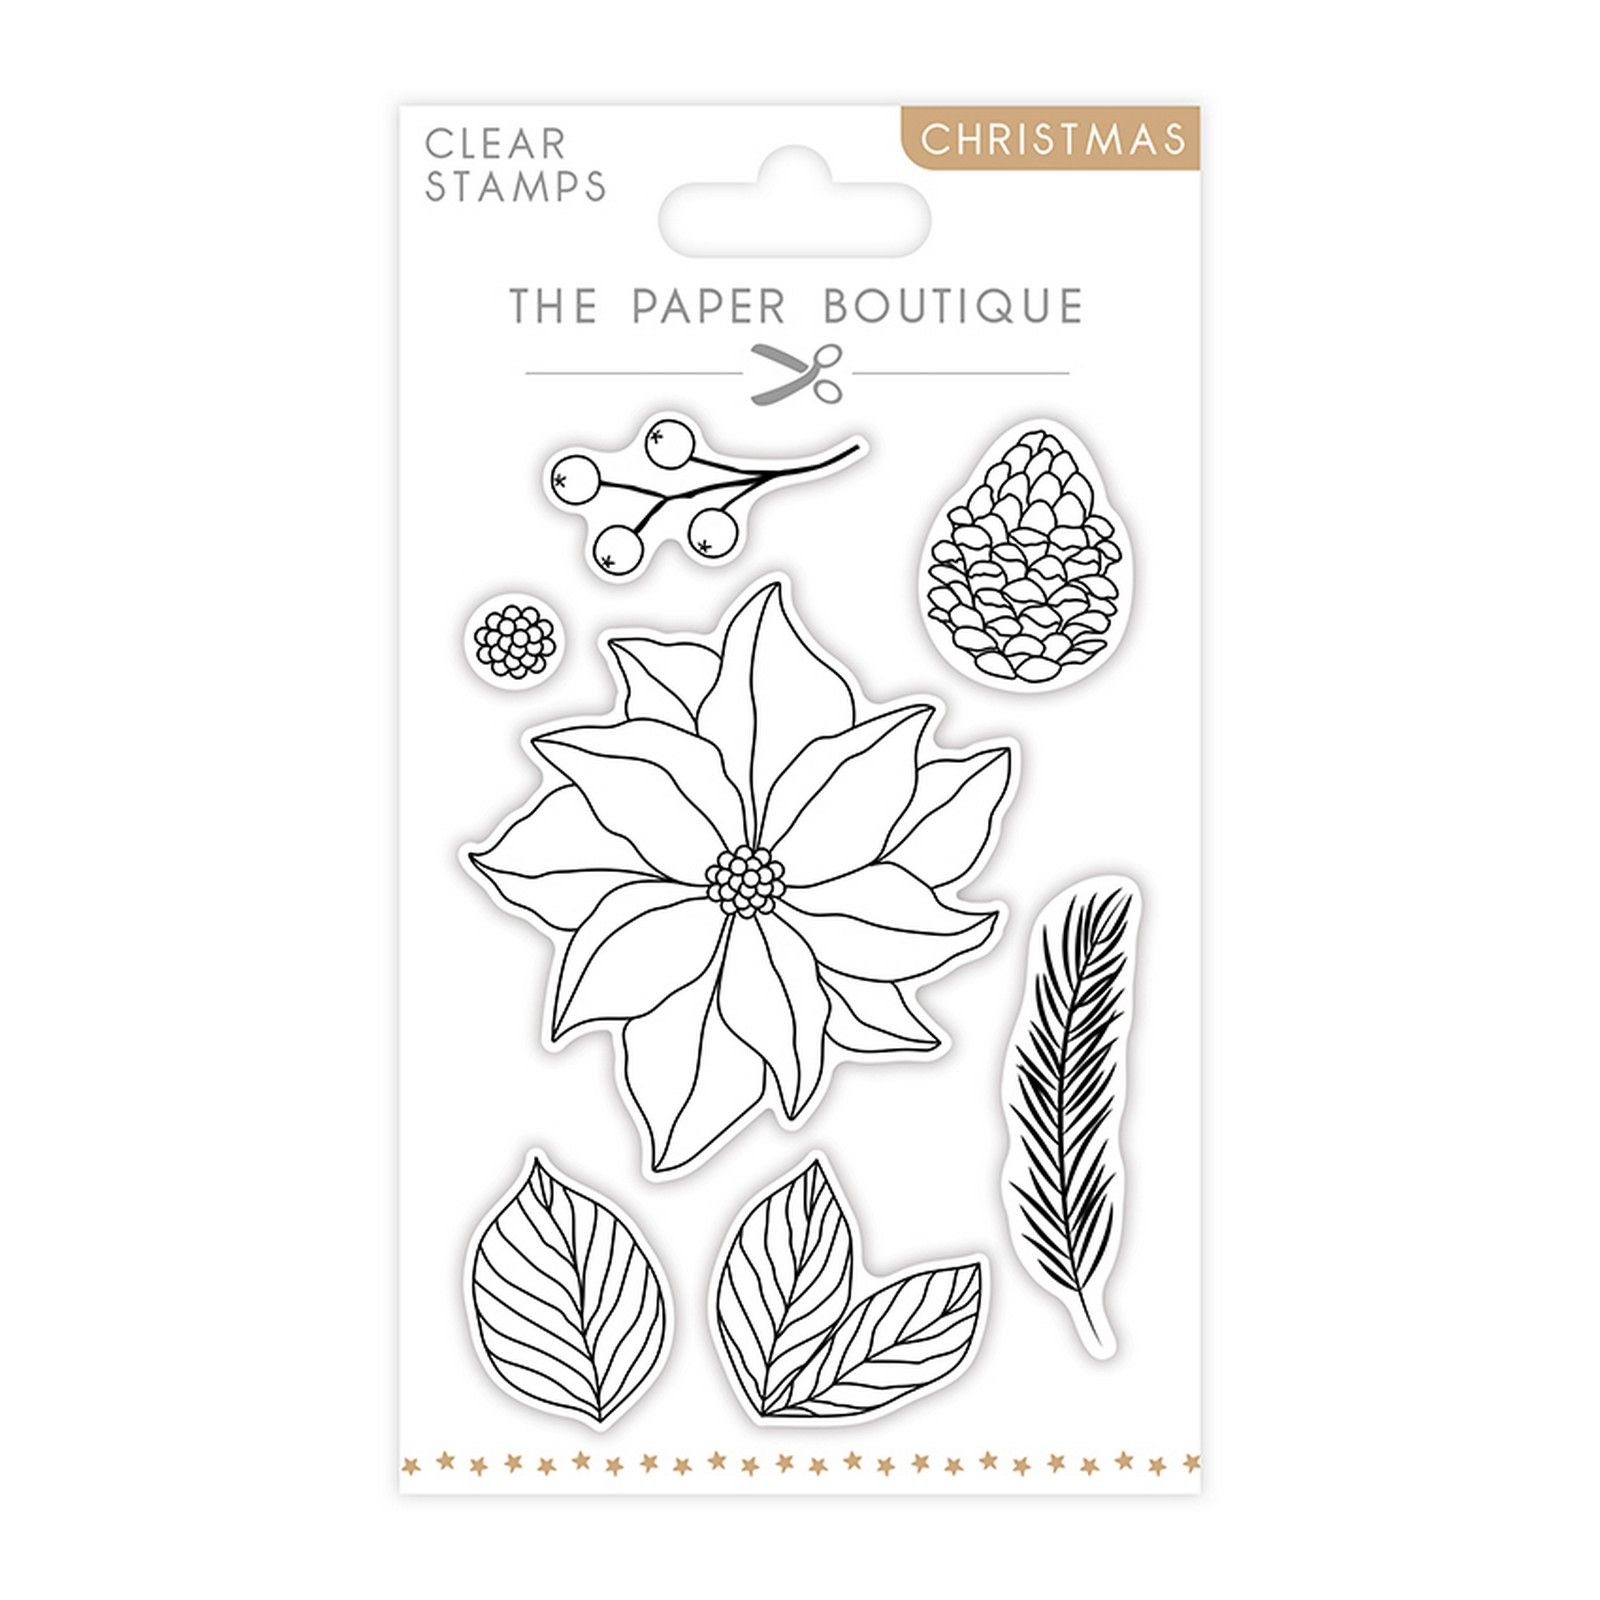 The Paper Boutique • Christmas clear stamps Poinsettia layering